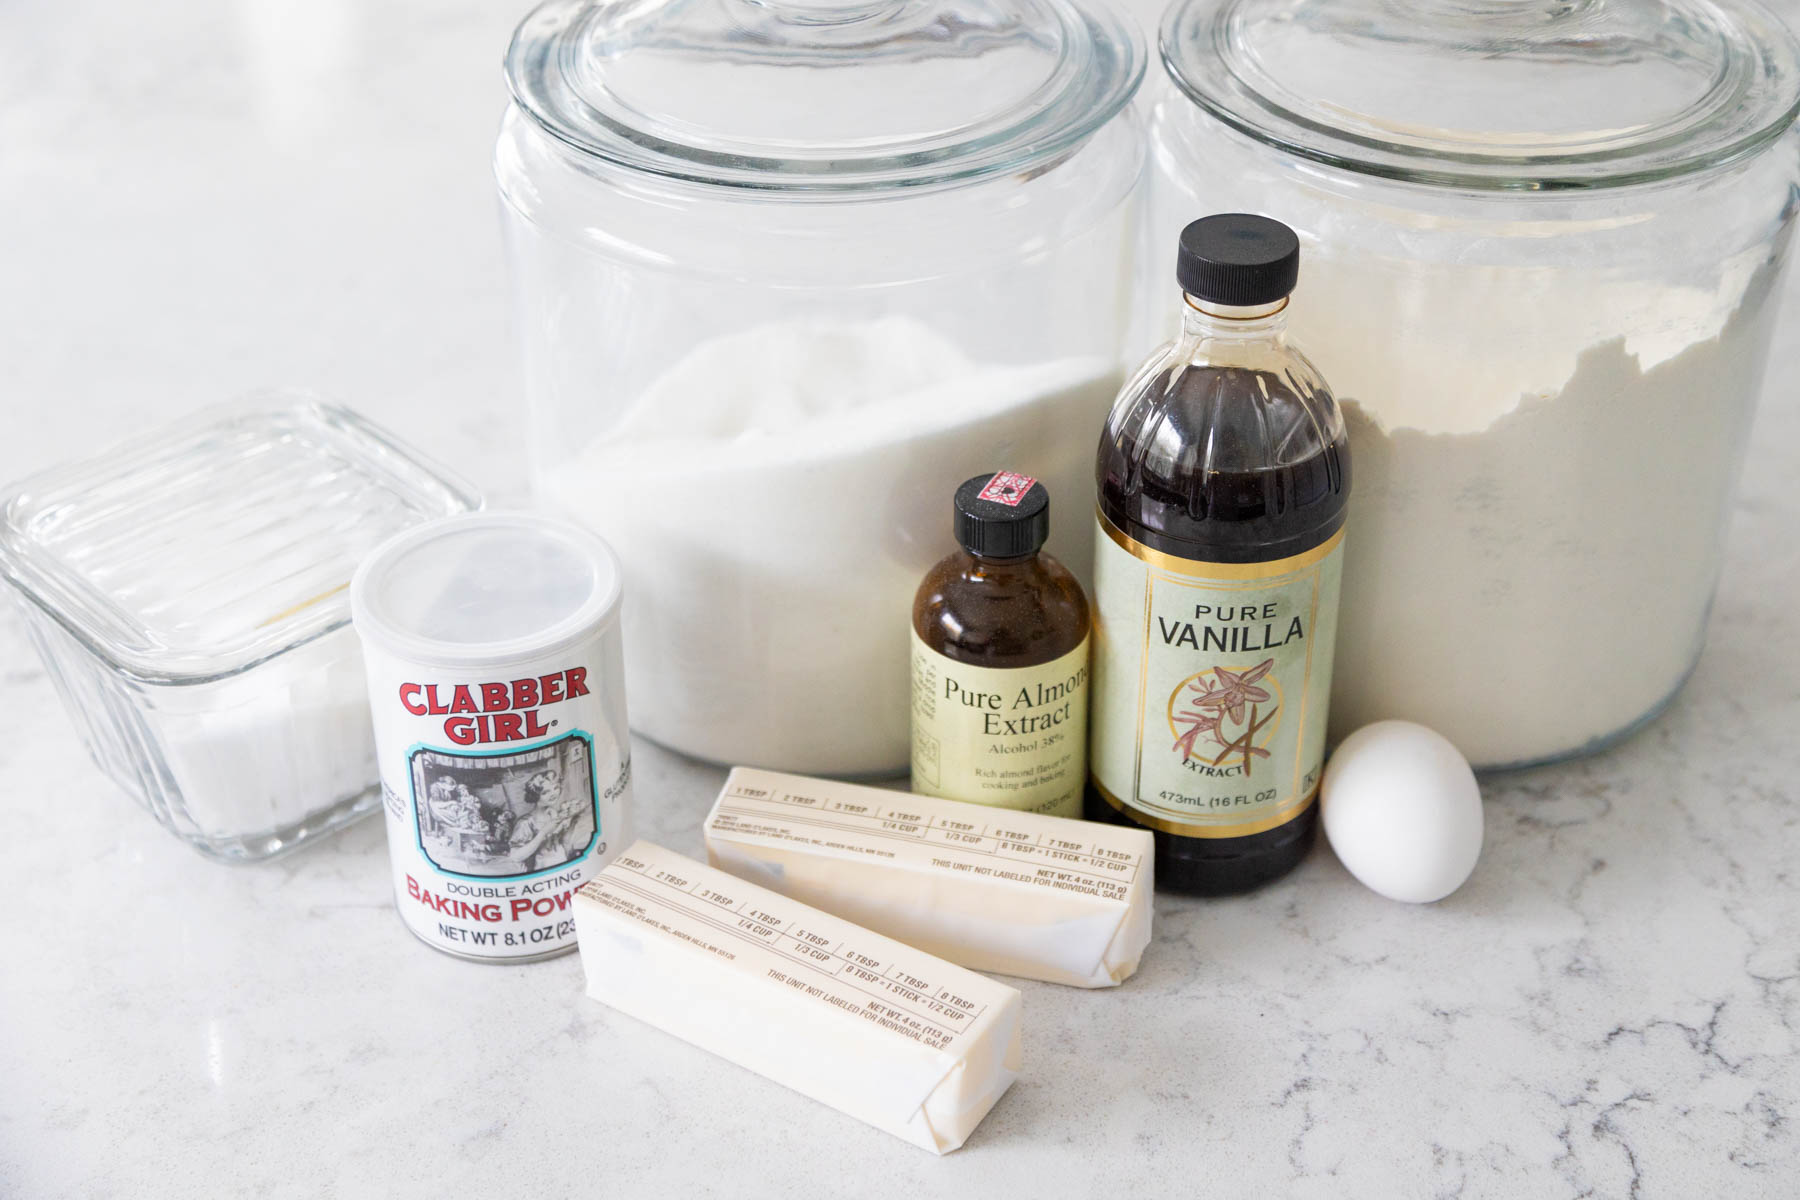 The ingredients to make cut out sugar cookies are on the kitchen counter.